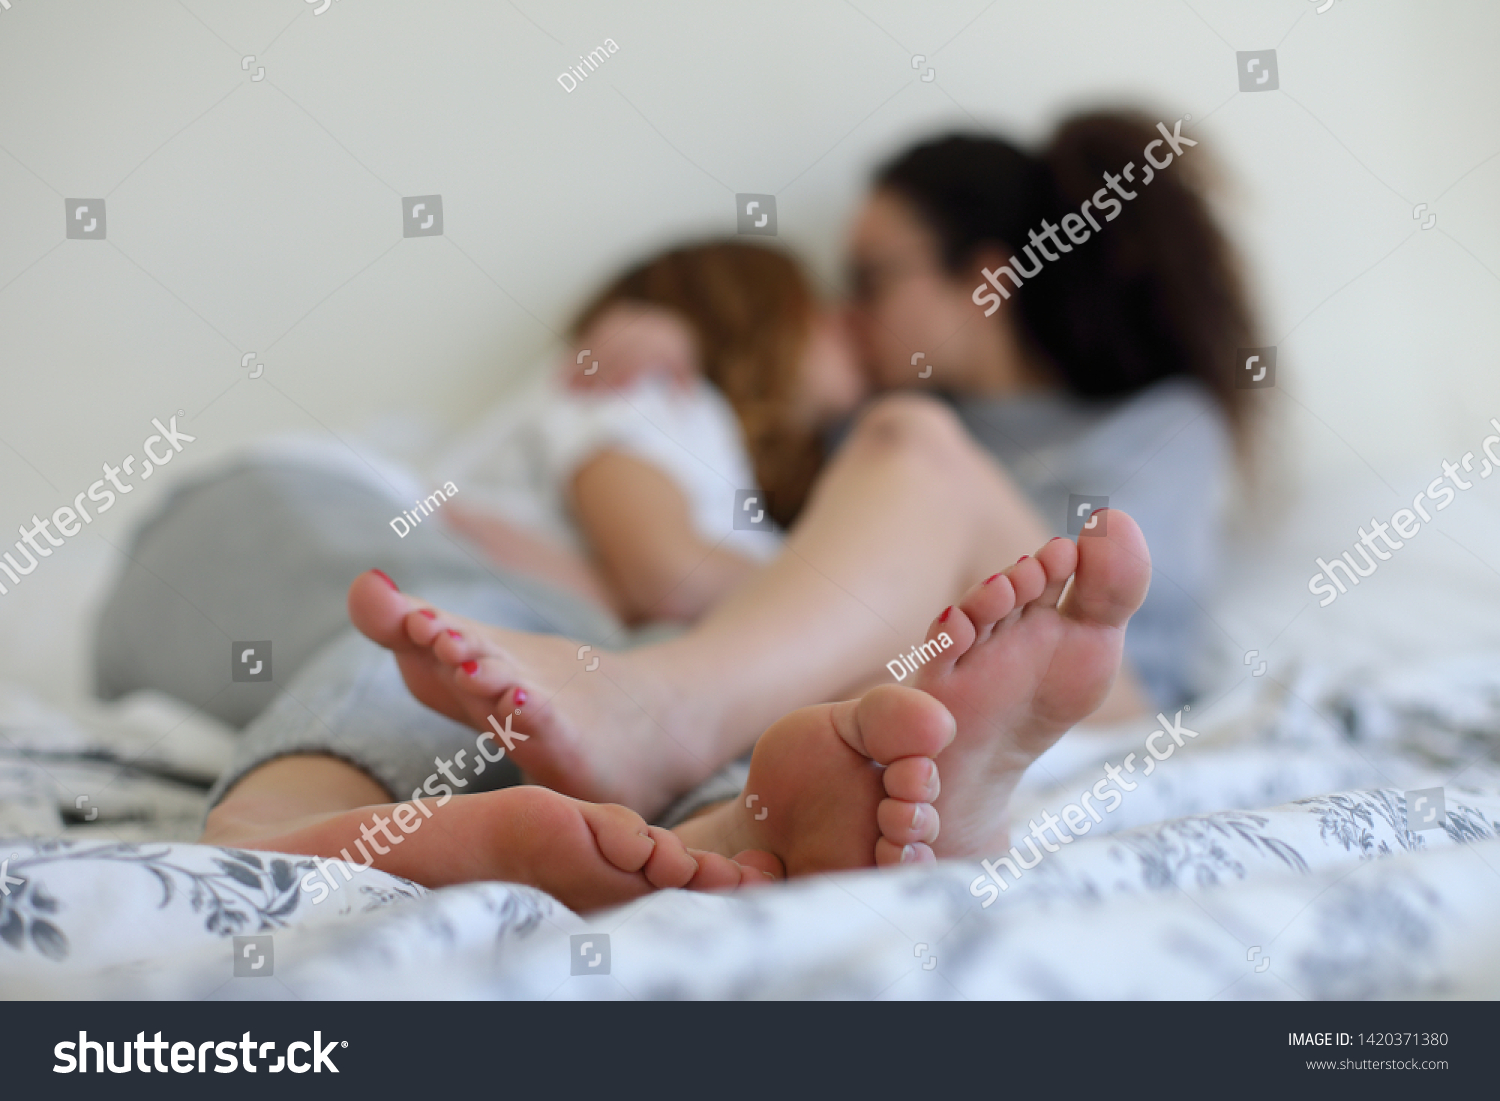 And feet lesbians Foot Fetishes: